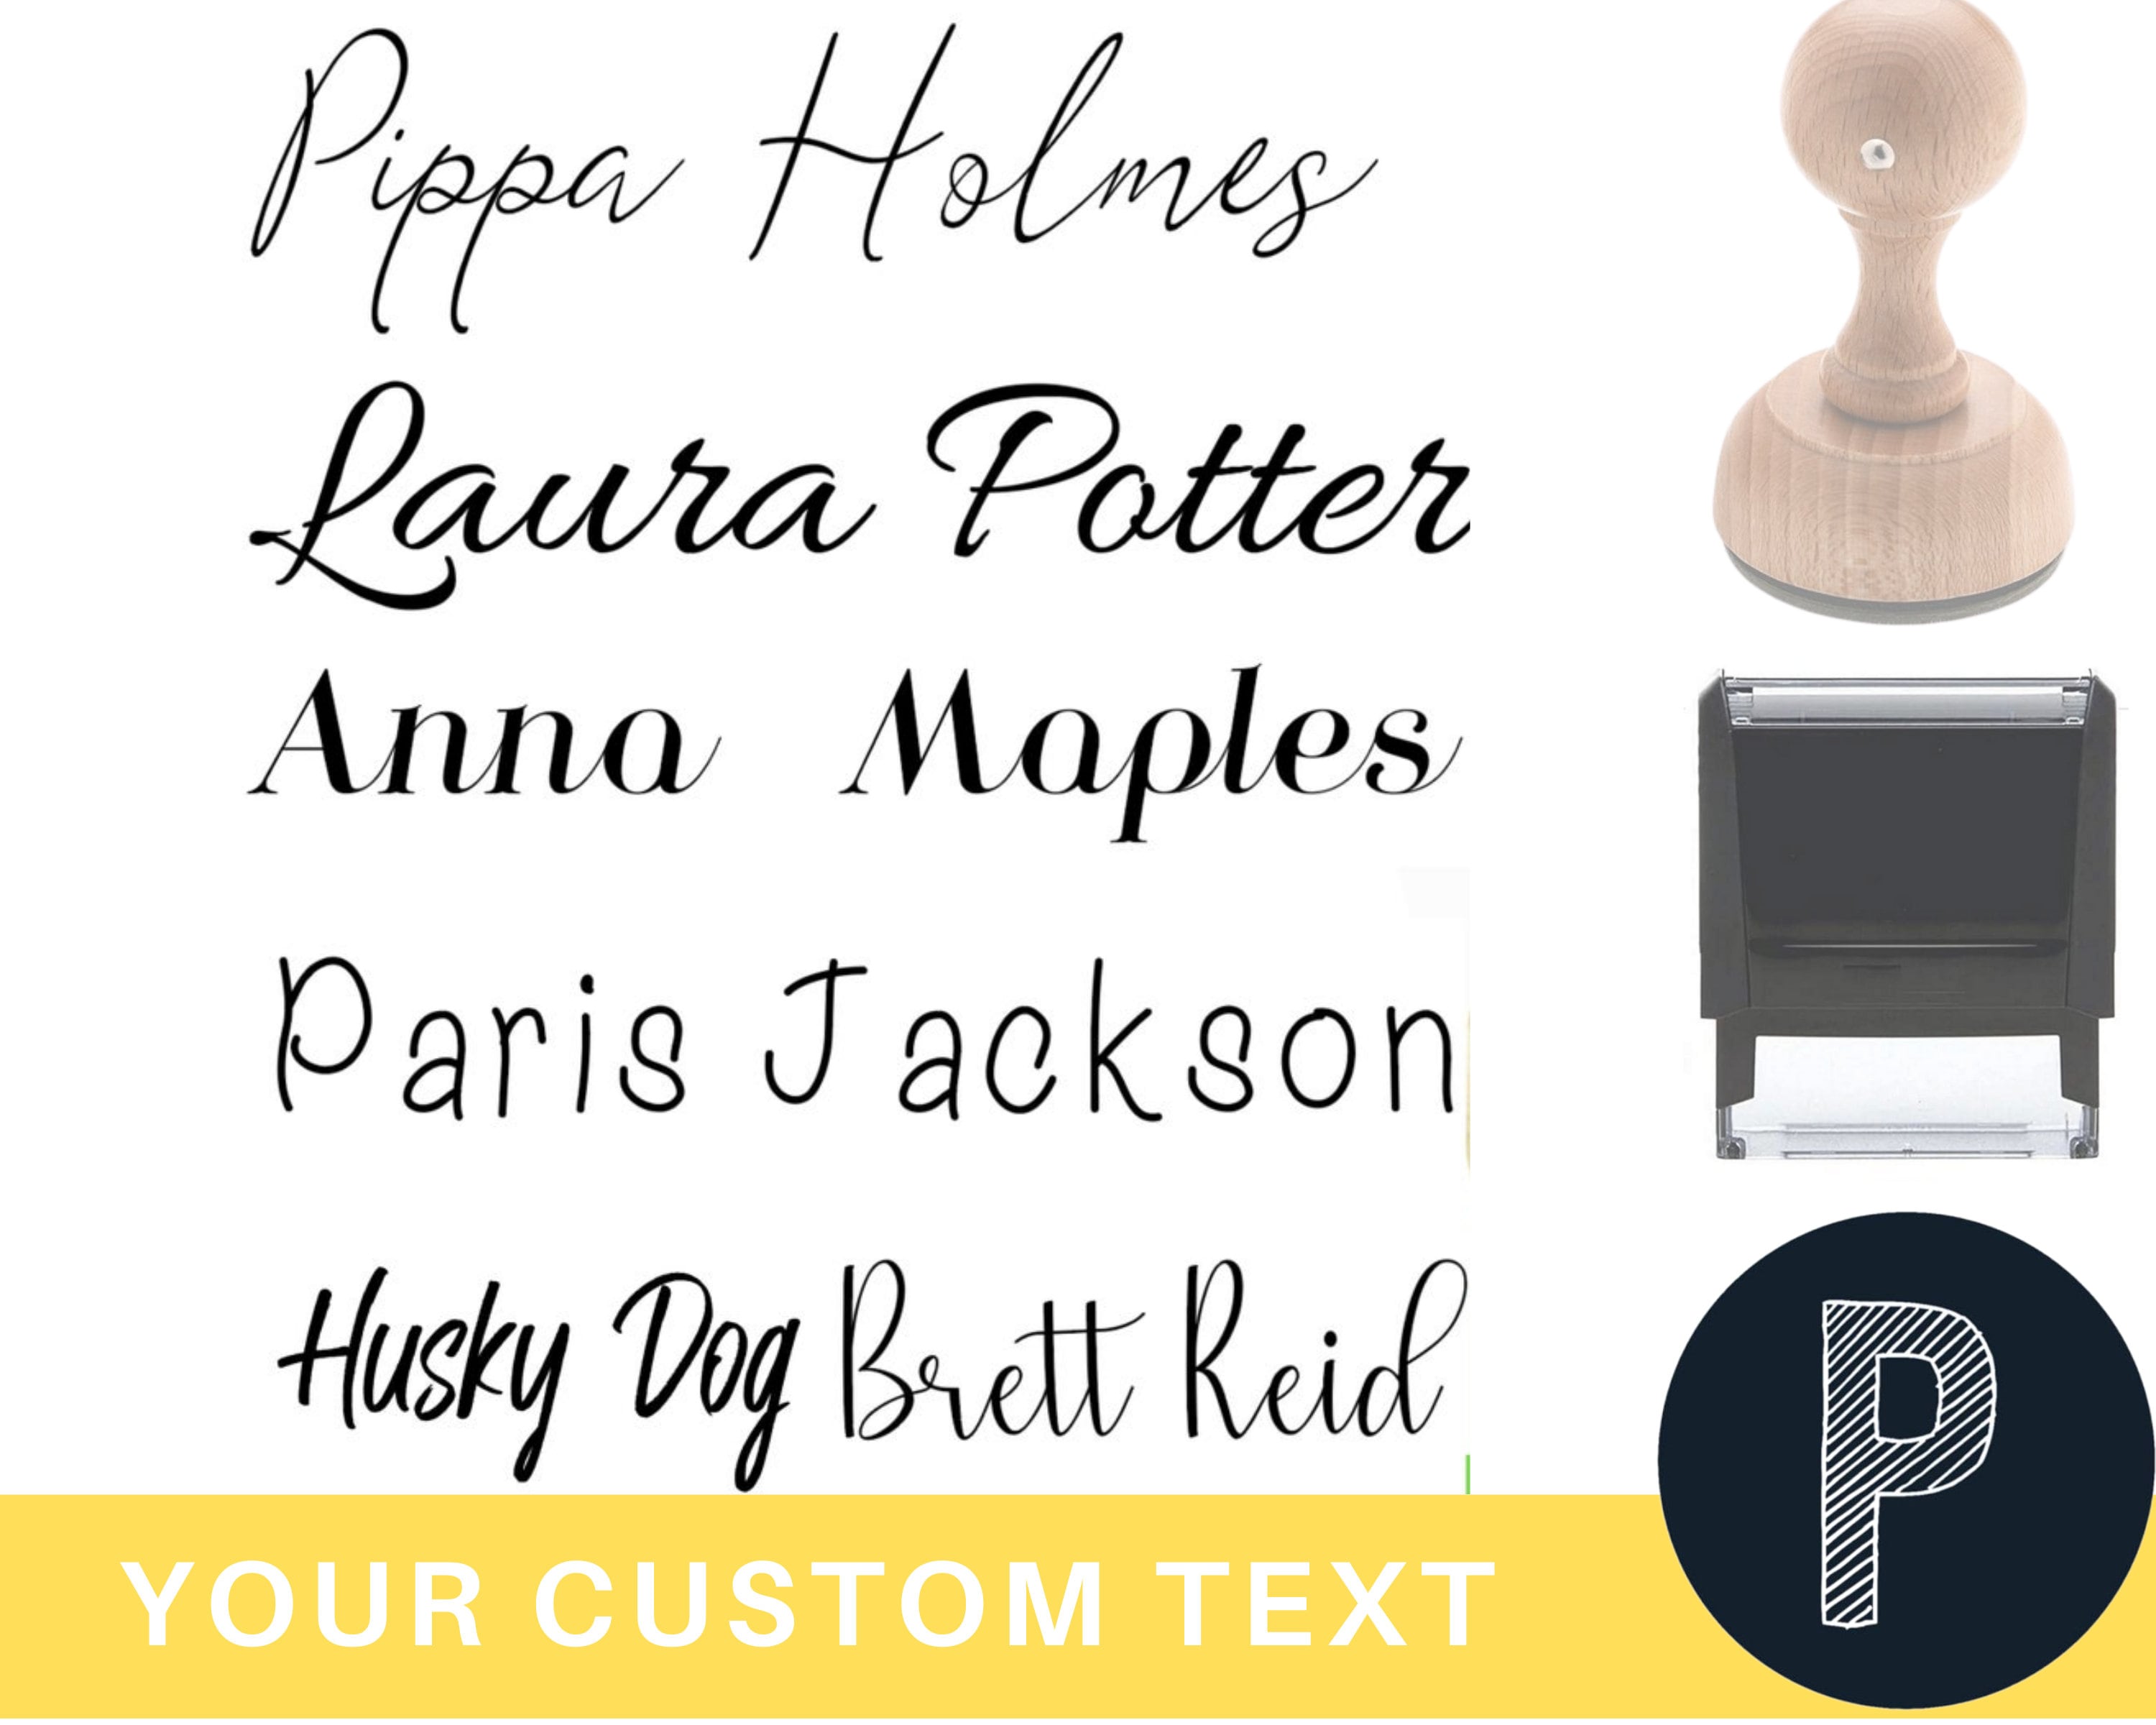 Printtoo Round Custom Business Rubber Stamp Wood Mounted Company Logo  Personalized Stamper Gift Idea 